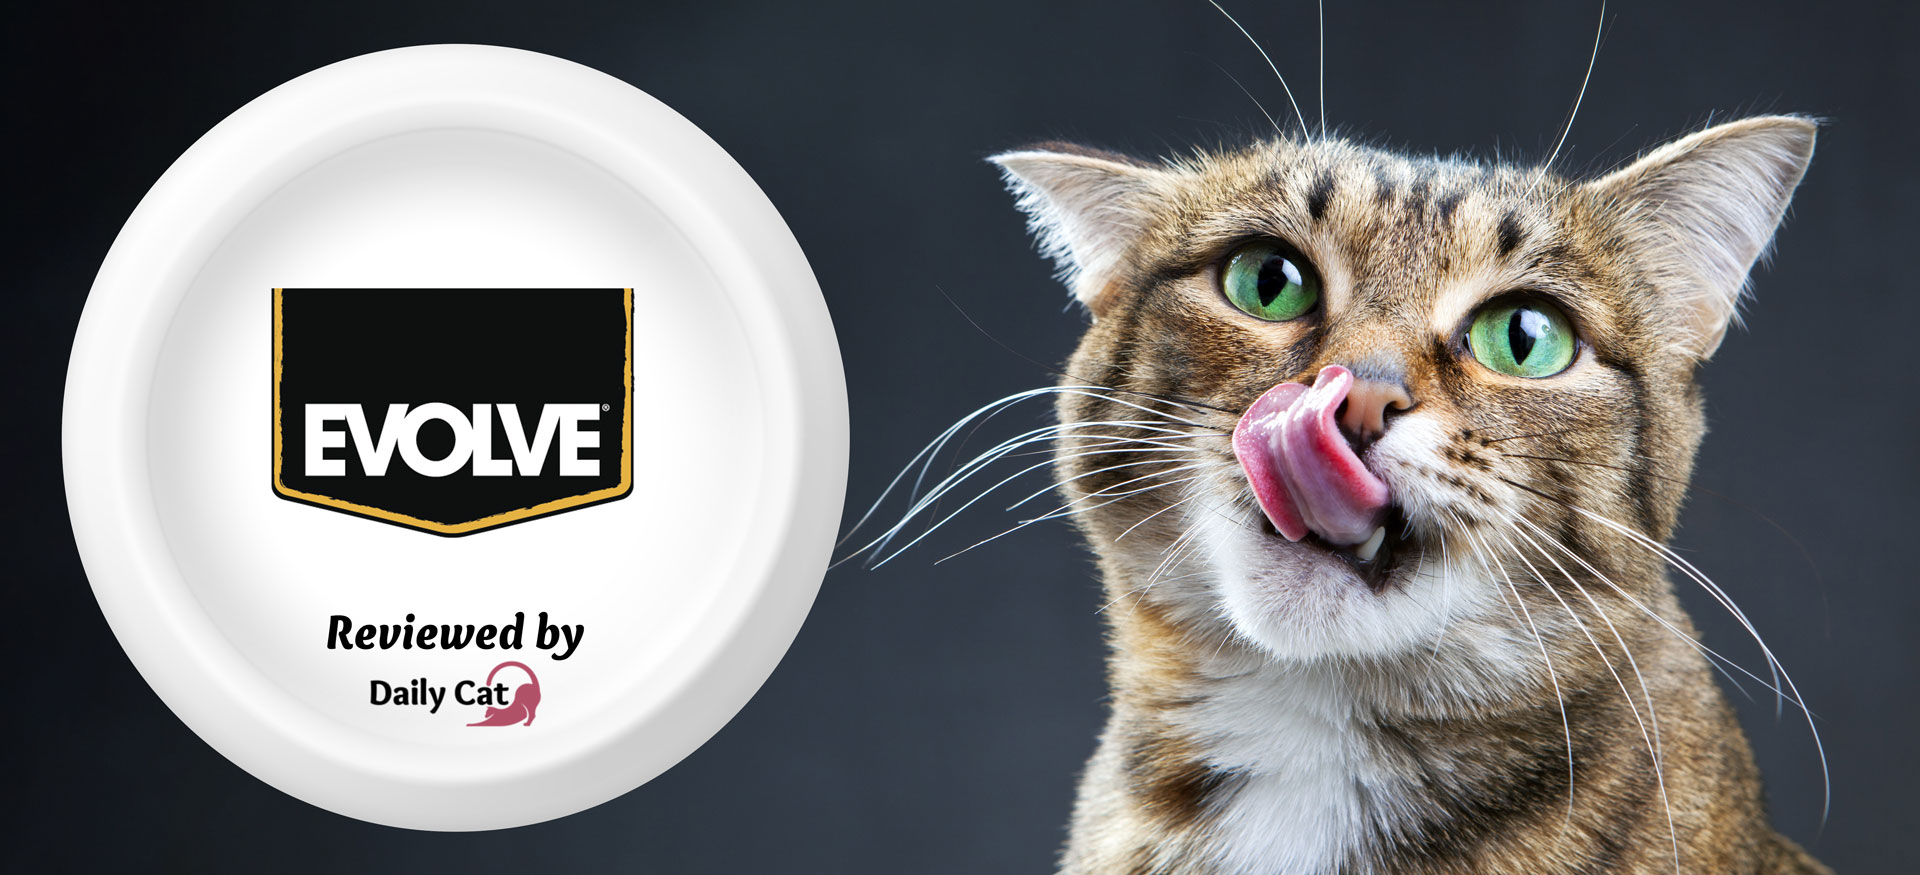 The Daily Cat-brand- Evolve Cat Food Review Graphic